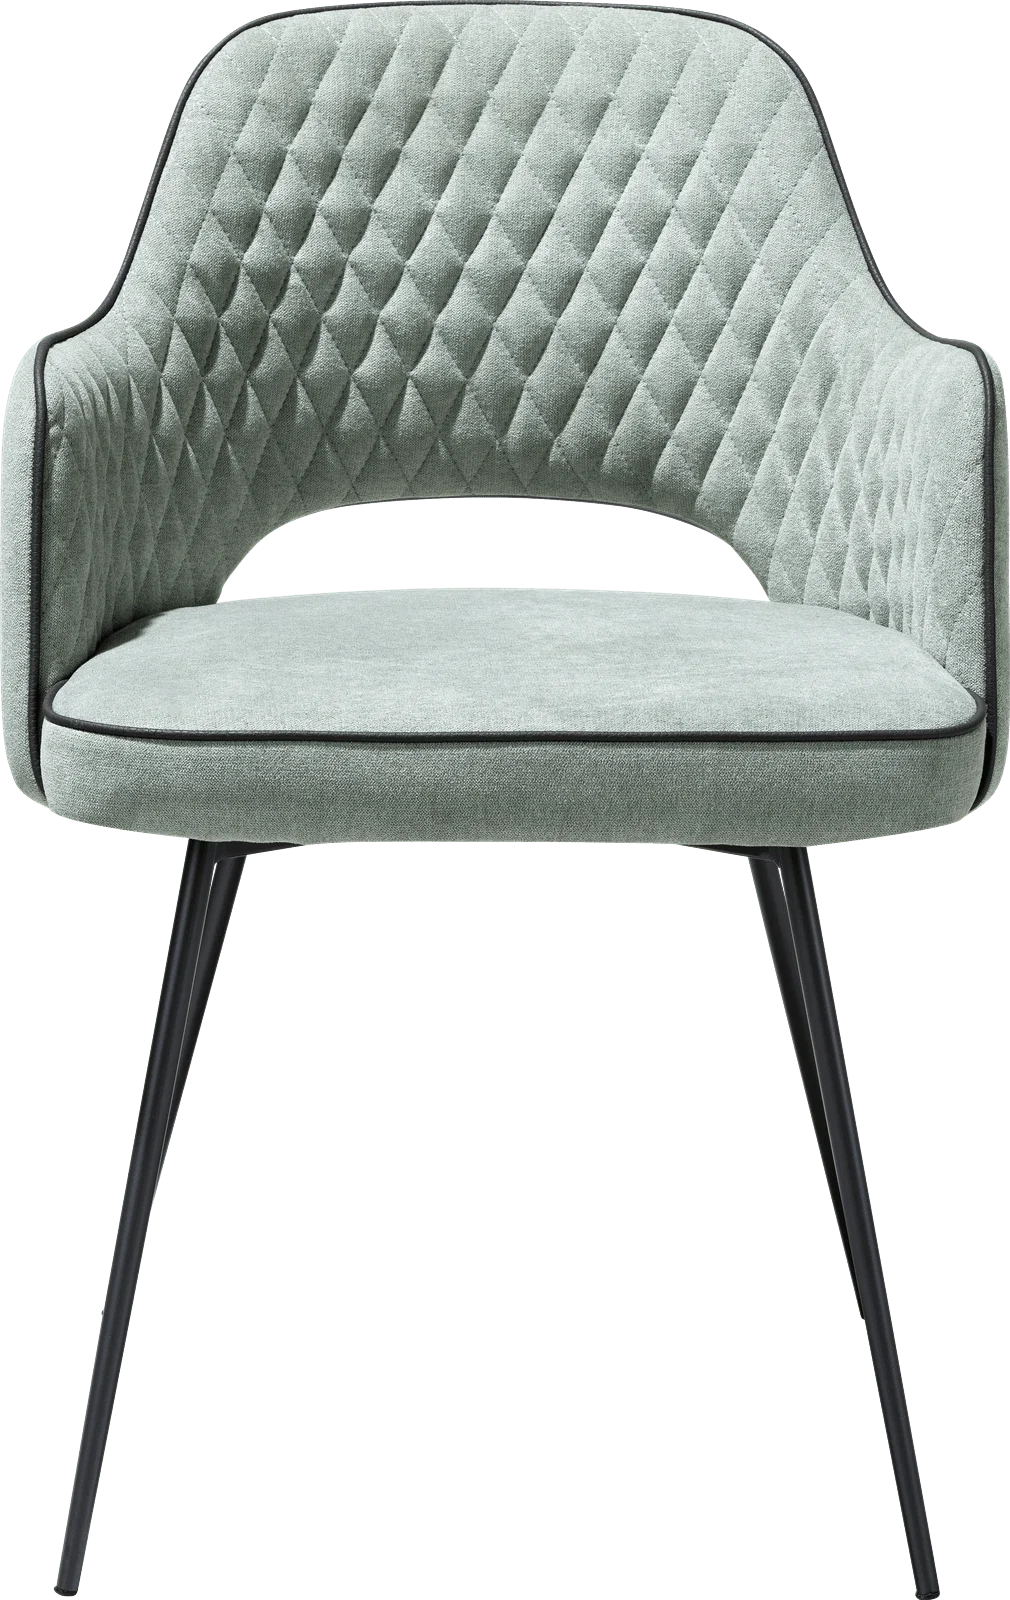 Fashion High Quality Diamond Pattern Elegant Fabric Dining Chair With Arm Rest